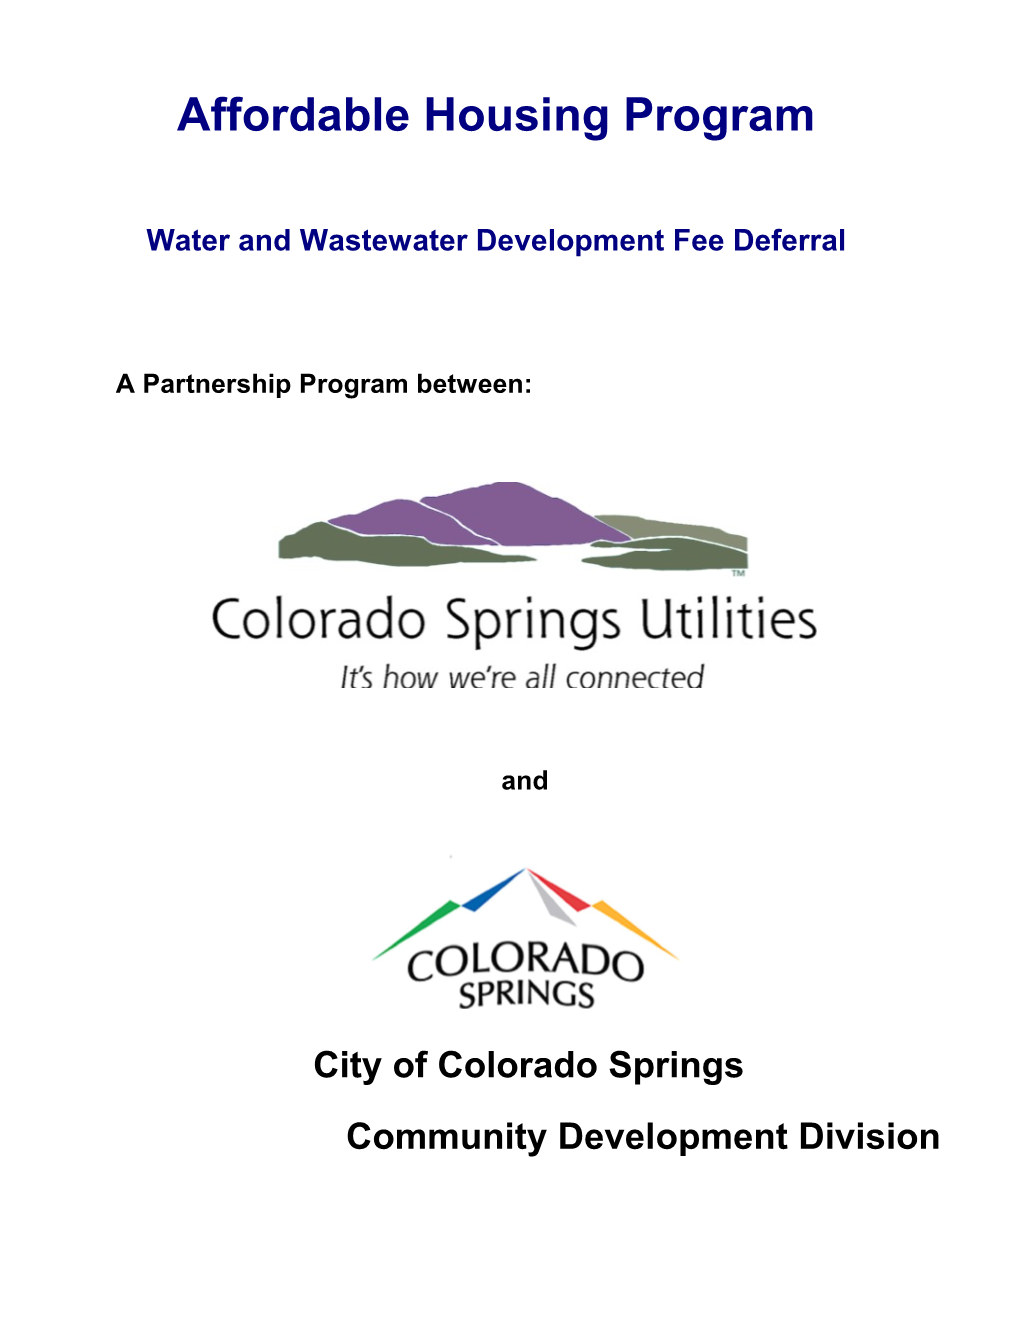 Water and Wastewater Development Fee Deferral